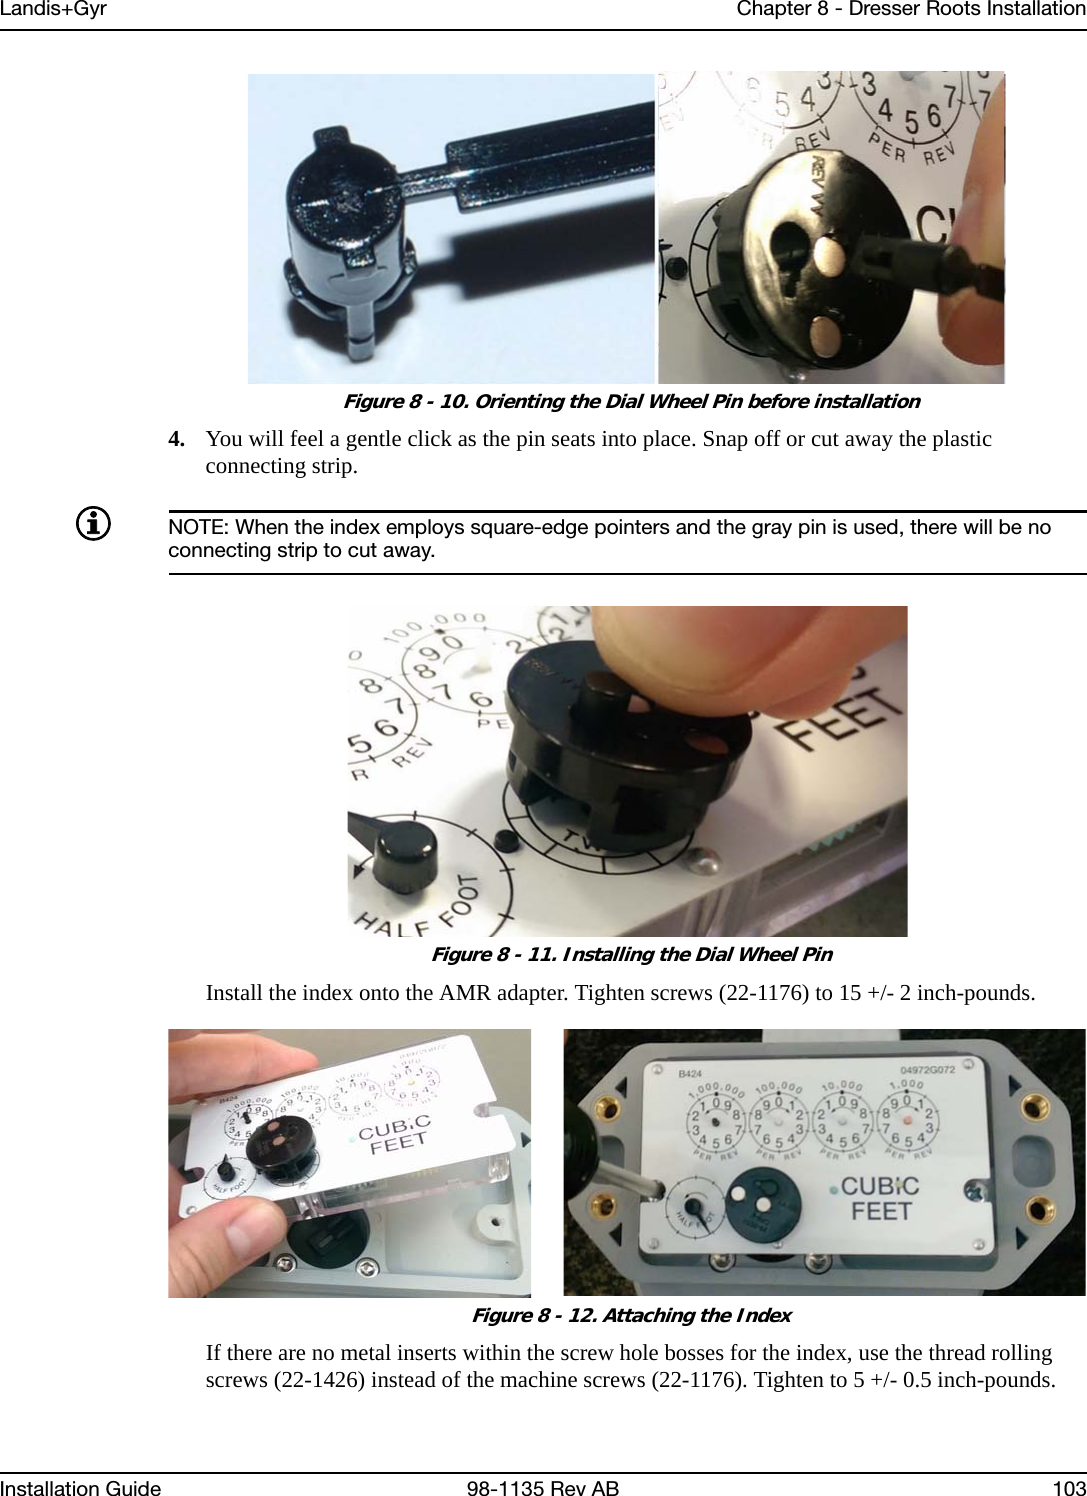 Landis+Gyr Chapter 8 - Dresser Roots InstallationInstallation Guide 98-1135 Rev AB 103 Figure 8 - 10. Orienting the Dial Wheel Pin before installation4. You will feel a gentle click as the pin seats into place. Snap off or cut away the plastic connecting strip.NOTE: When the index employs square-edge pointers and the gray pin is used, there will be no connecting strip to cut away. Figure 8 - 11. Installing the Dial Wheel PinInstall the index onto the AMR adapter. Tighten screws (22-1176) to 15 +/- 2 inch-pounds. Figure 8 - 12. Attaching the IndexIf there are no metal inserts within the screw hole bosses for the index, use the thread rolling screws (22-1426) instead of the machine screws (22-1176). Tighten to 5 +/- 0.5 inch-pounds.